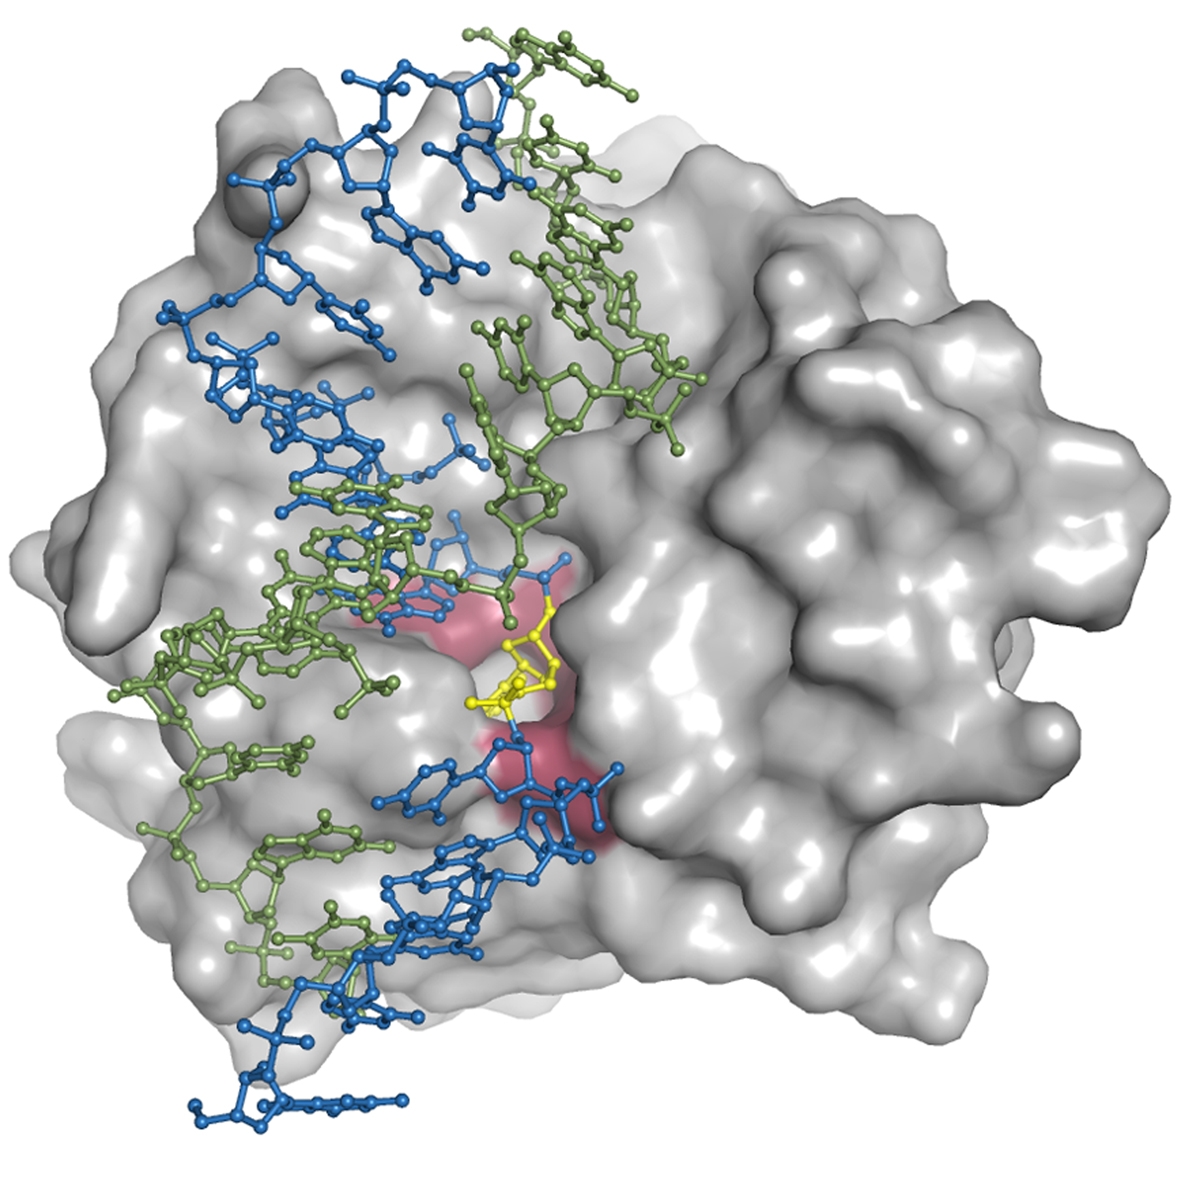 The protein surface of EndoV (gray) is optimized to bind DNA (blue and green
double helix). The deaminated and damaged base (yellow) is recognized inside a spesific
pocket on the EndoV surface (red). (click to enlarge image)